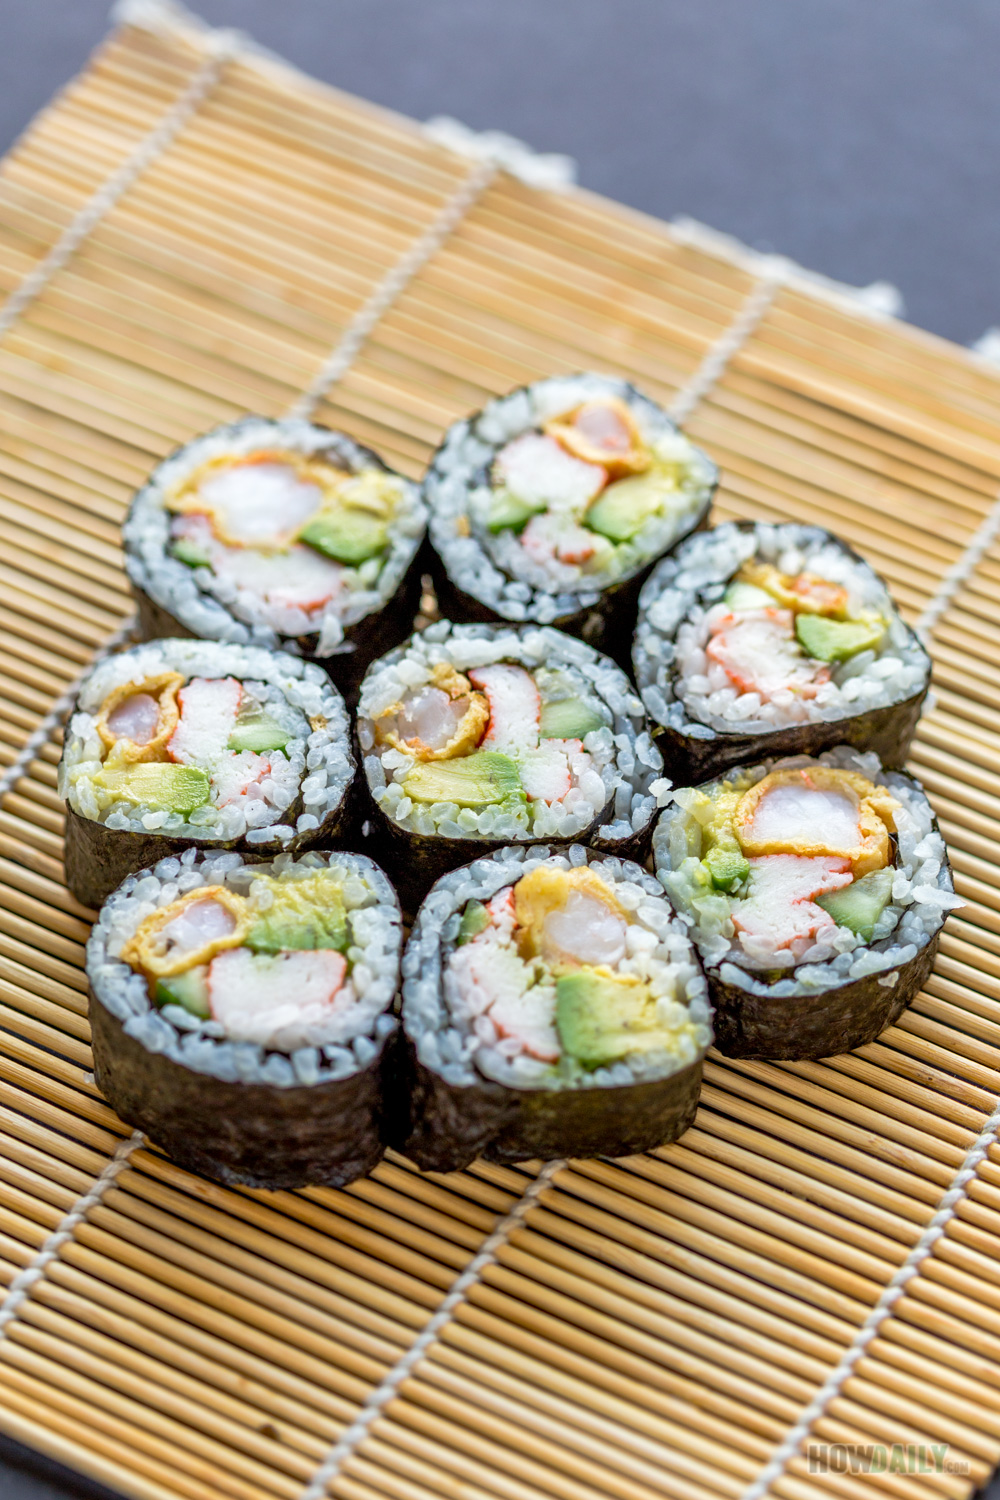 https://howdaily.com/wp-content/uploads/2017/11/new-mexico-sushi-roll.jpg